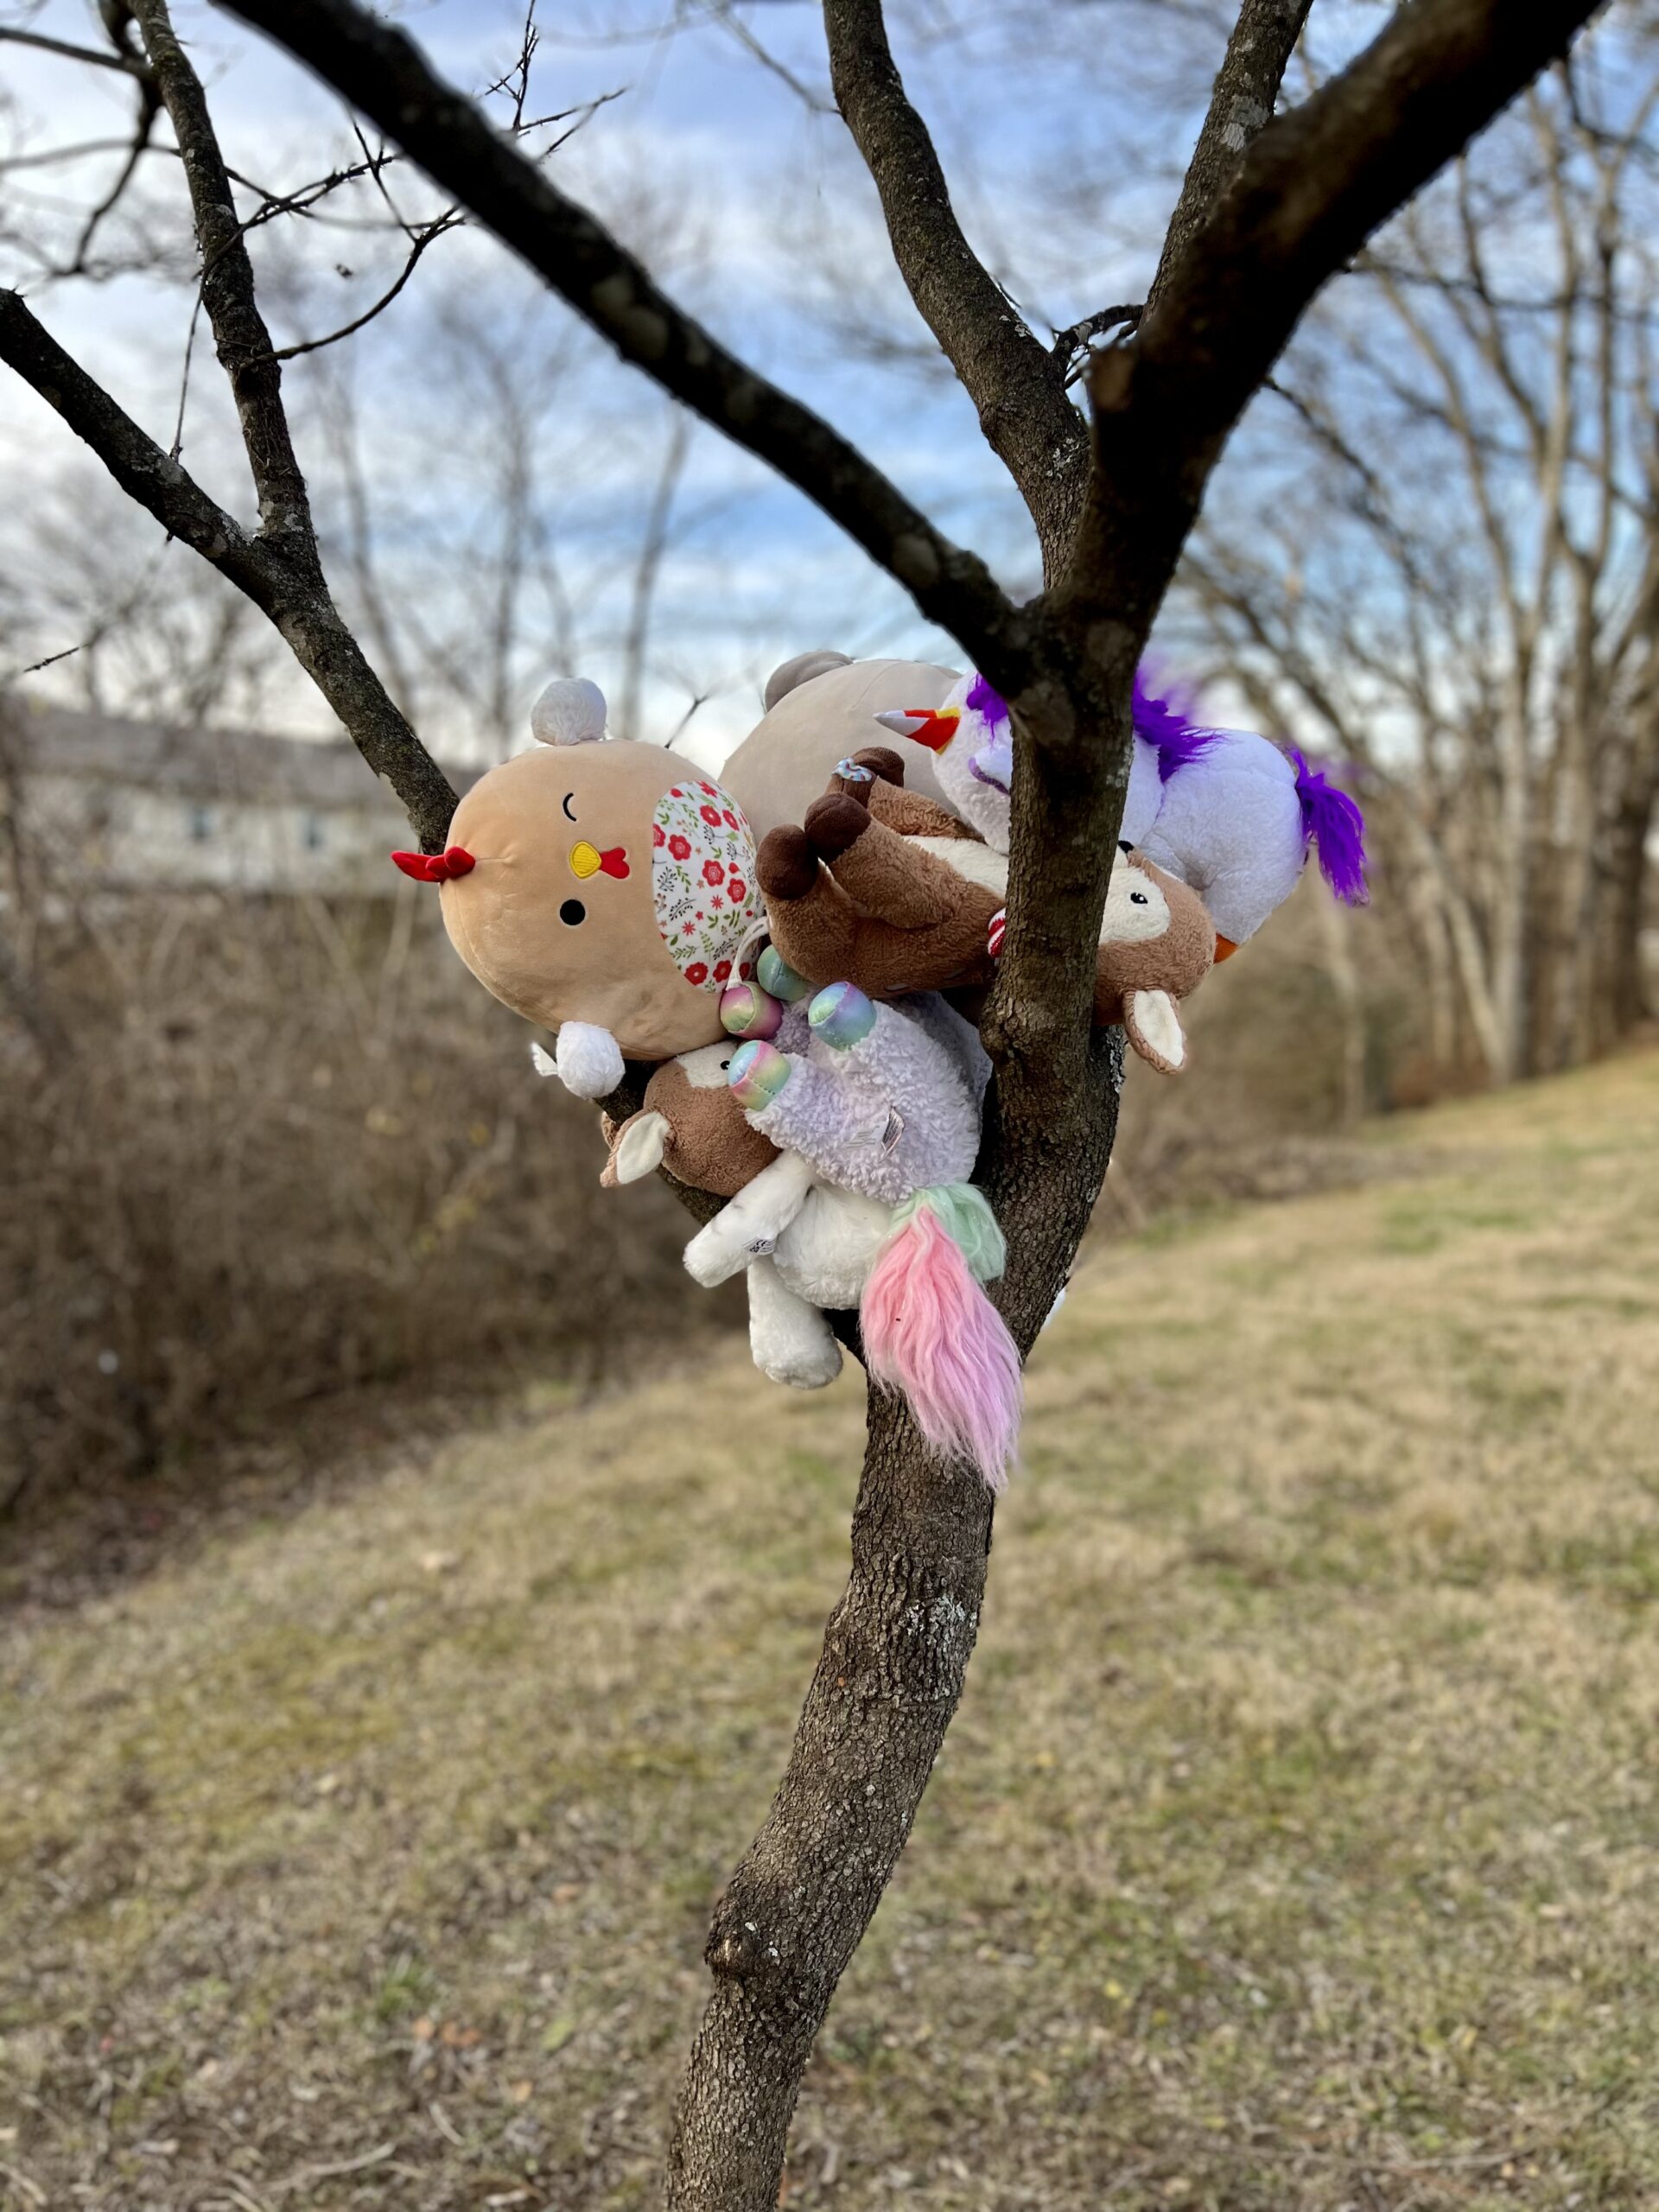 Stuffed animals in tree, the kids are all right